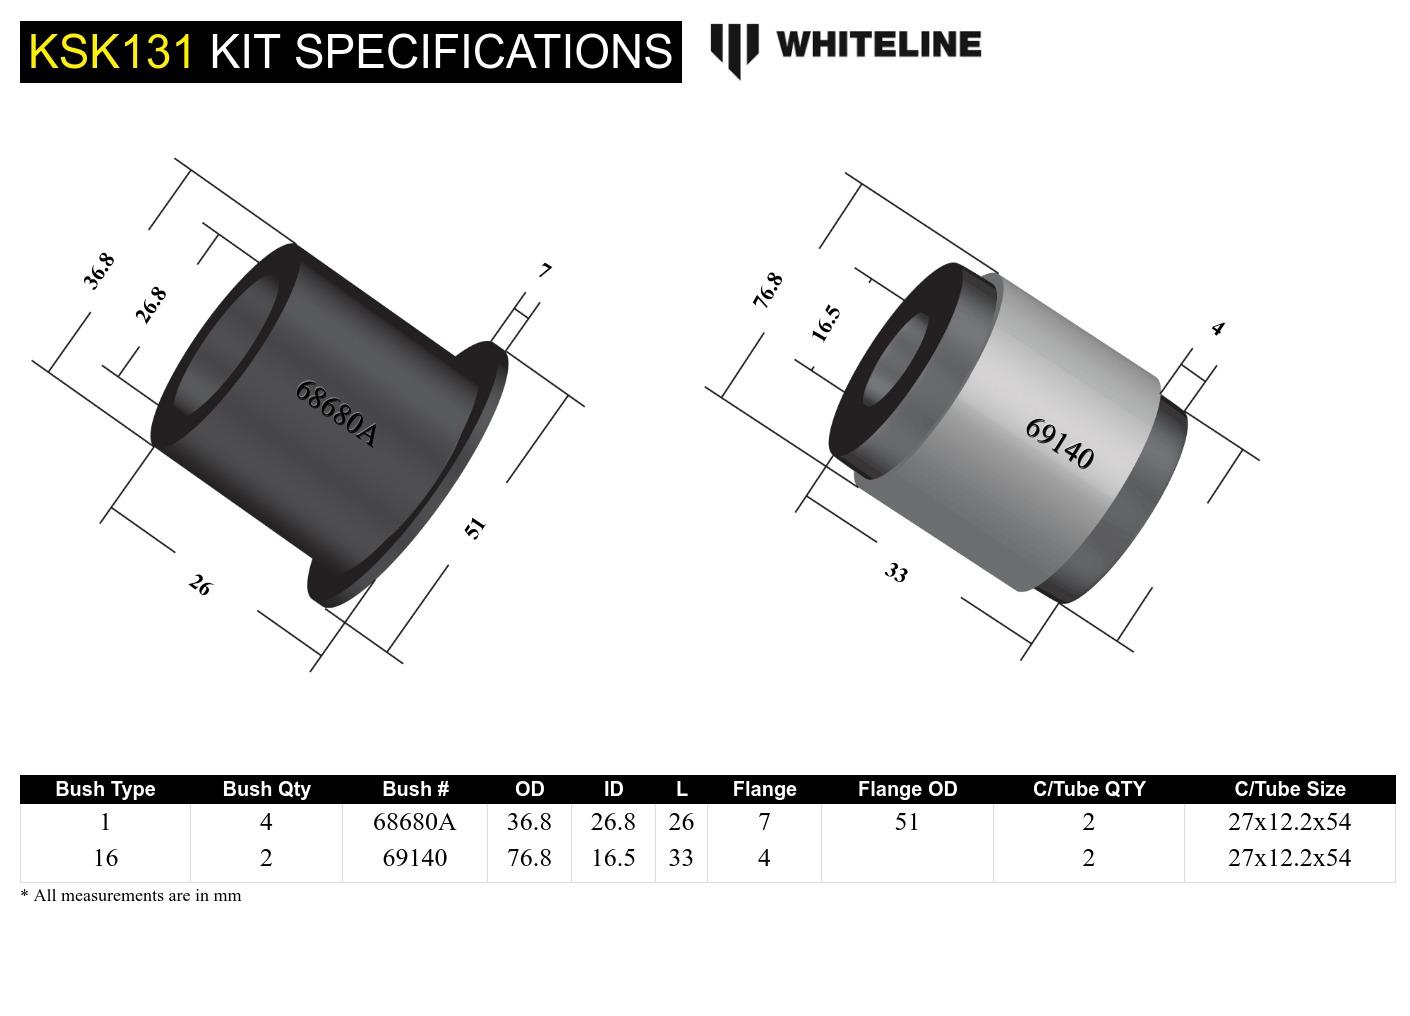 Ball Joint - Service Kit